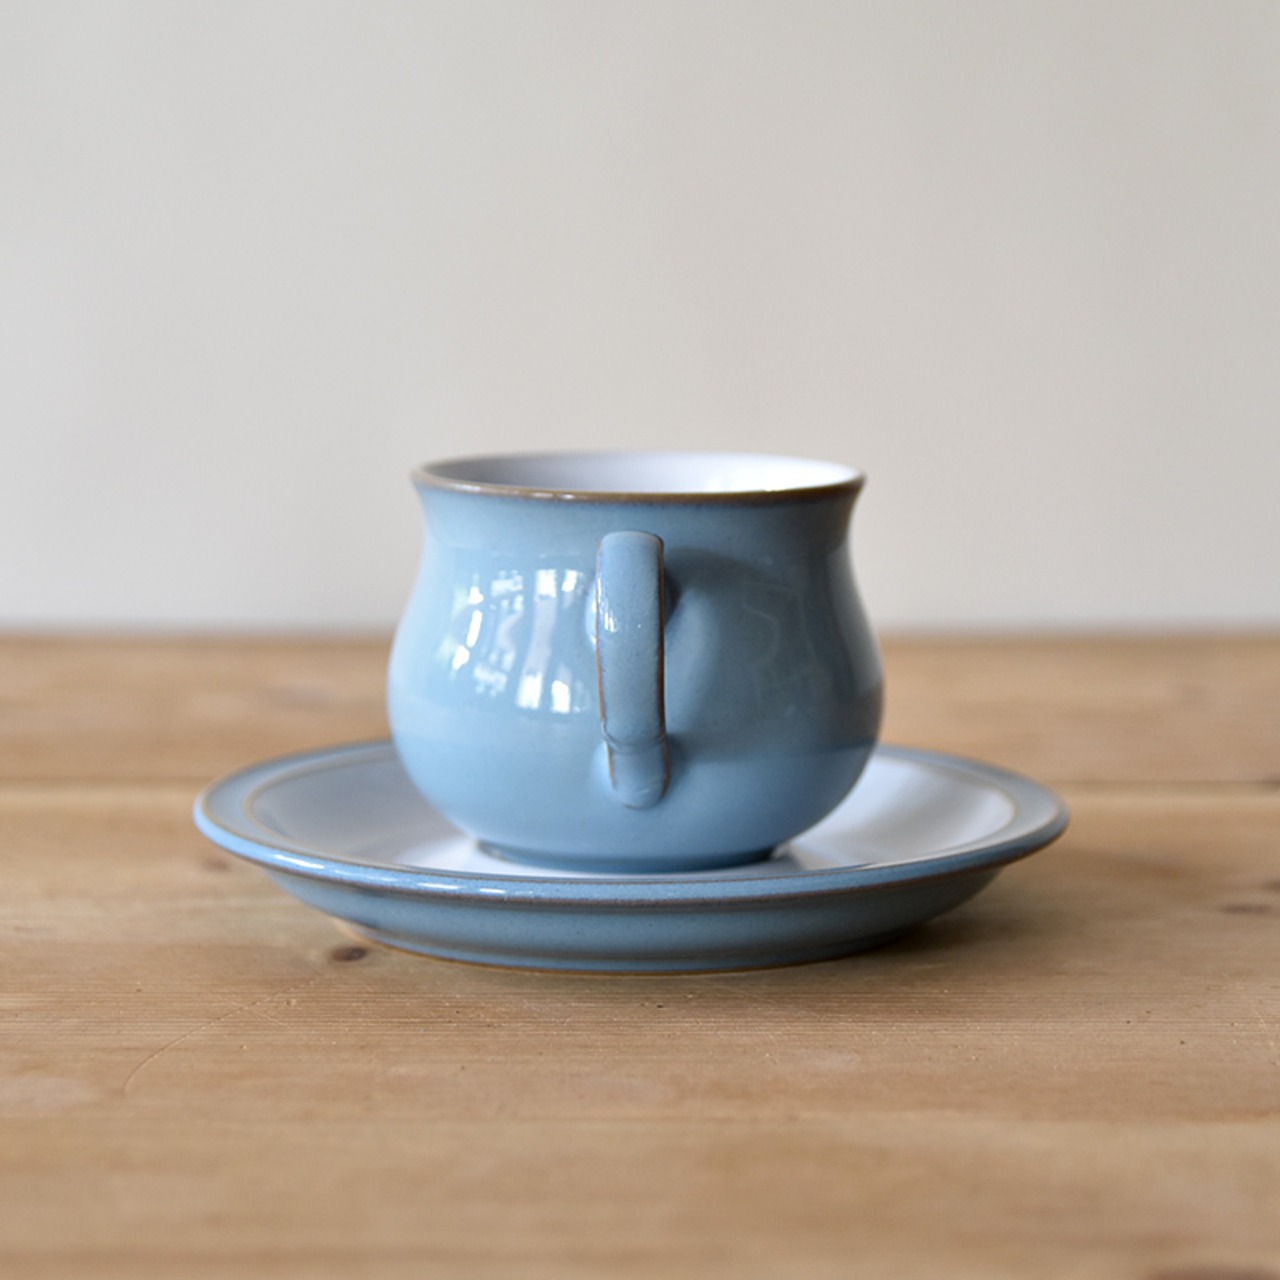 Denby Cup & Saucer / デンビー カップ & ソーサー / 2101-SLW-111720